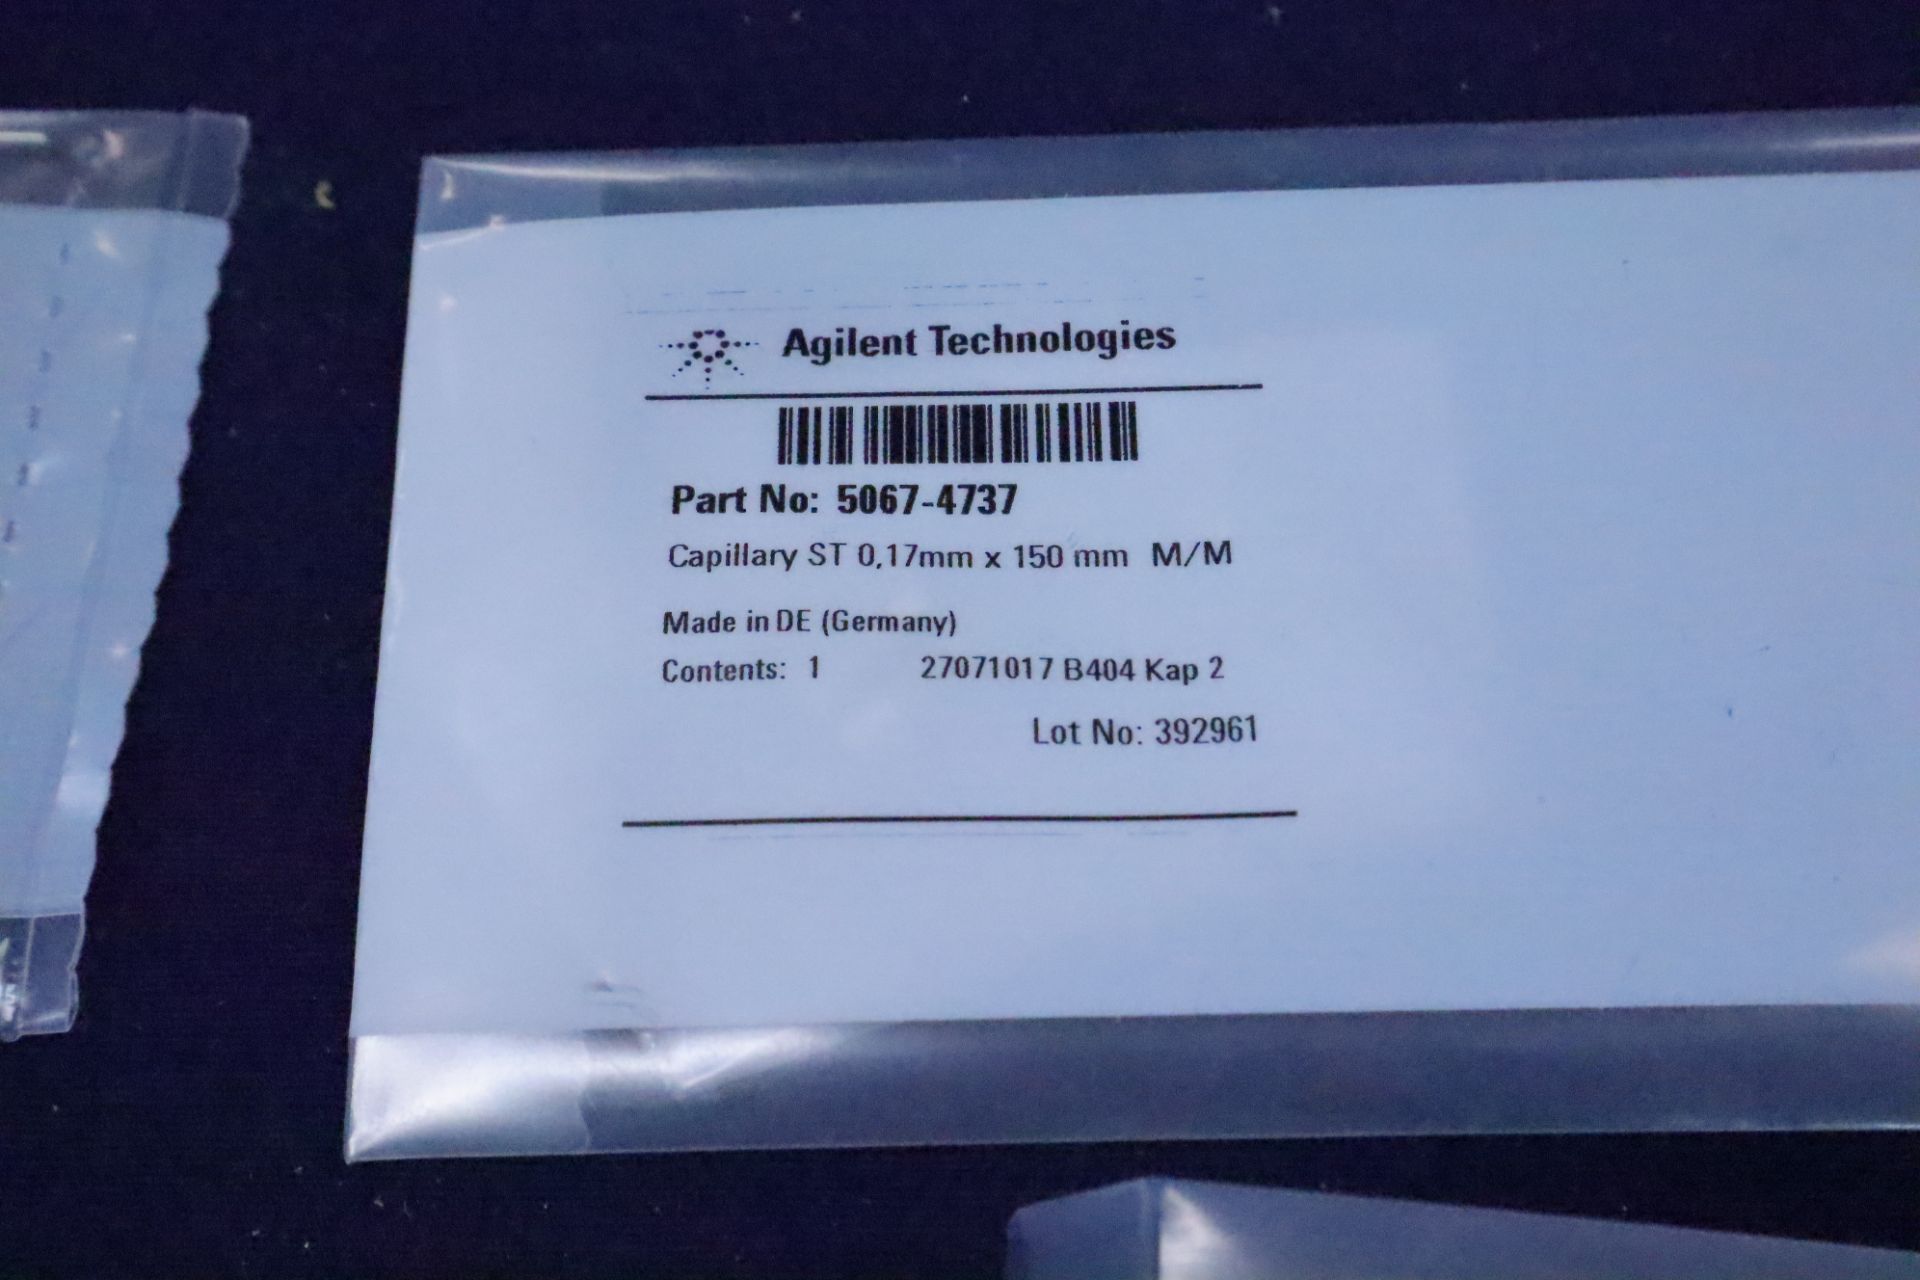 UPDATED PHOTOS Agilent Technologies OEM Replacement Parts and tool kits for LC/MS Machines - Image 20 of 37